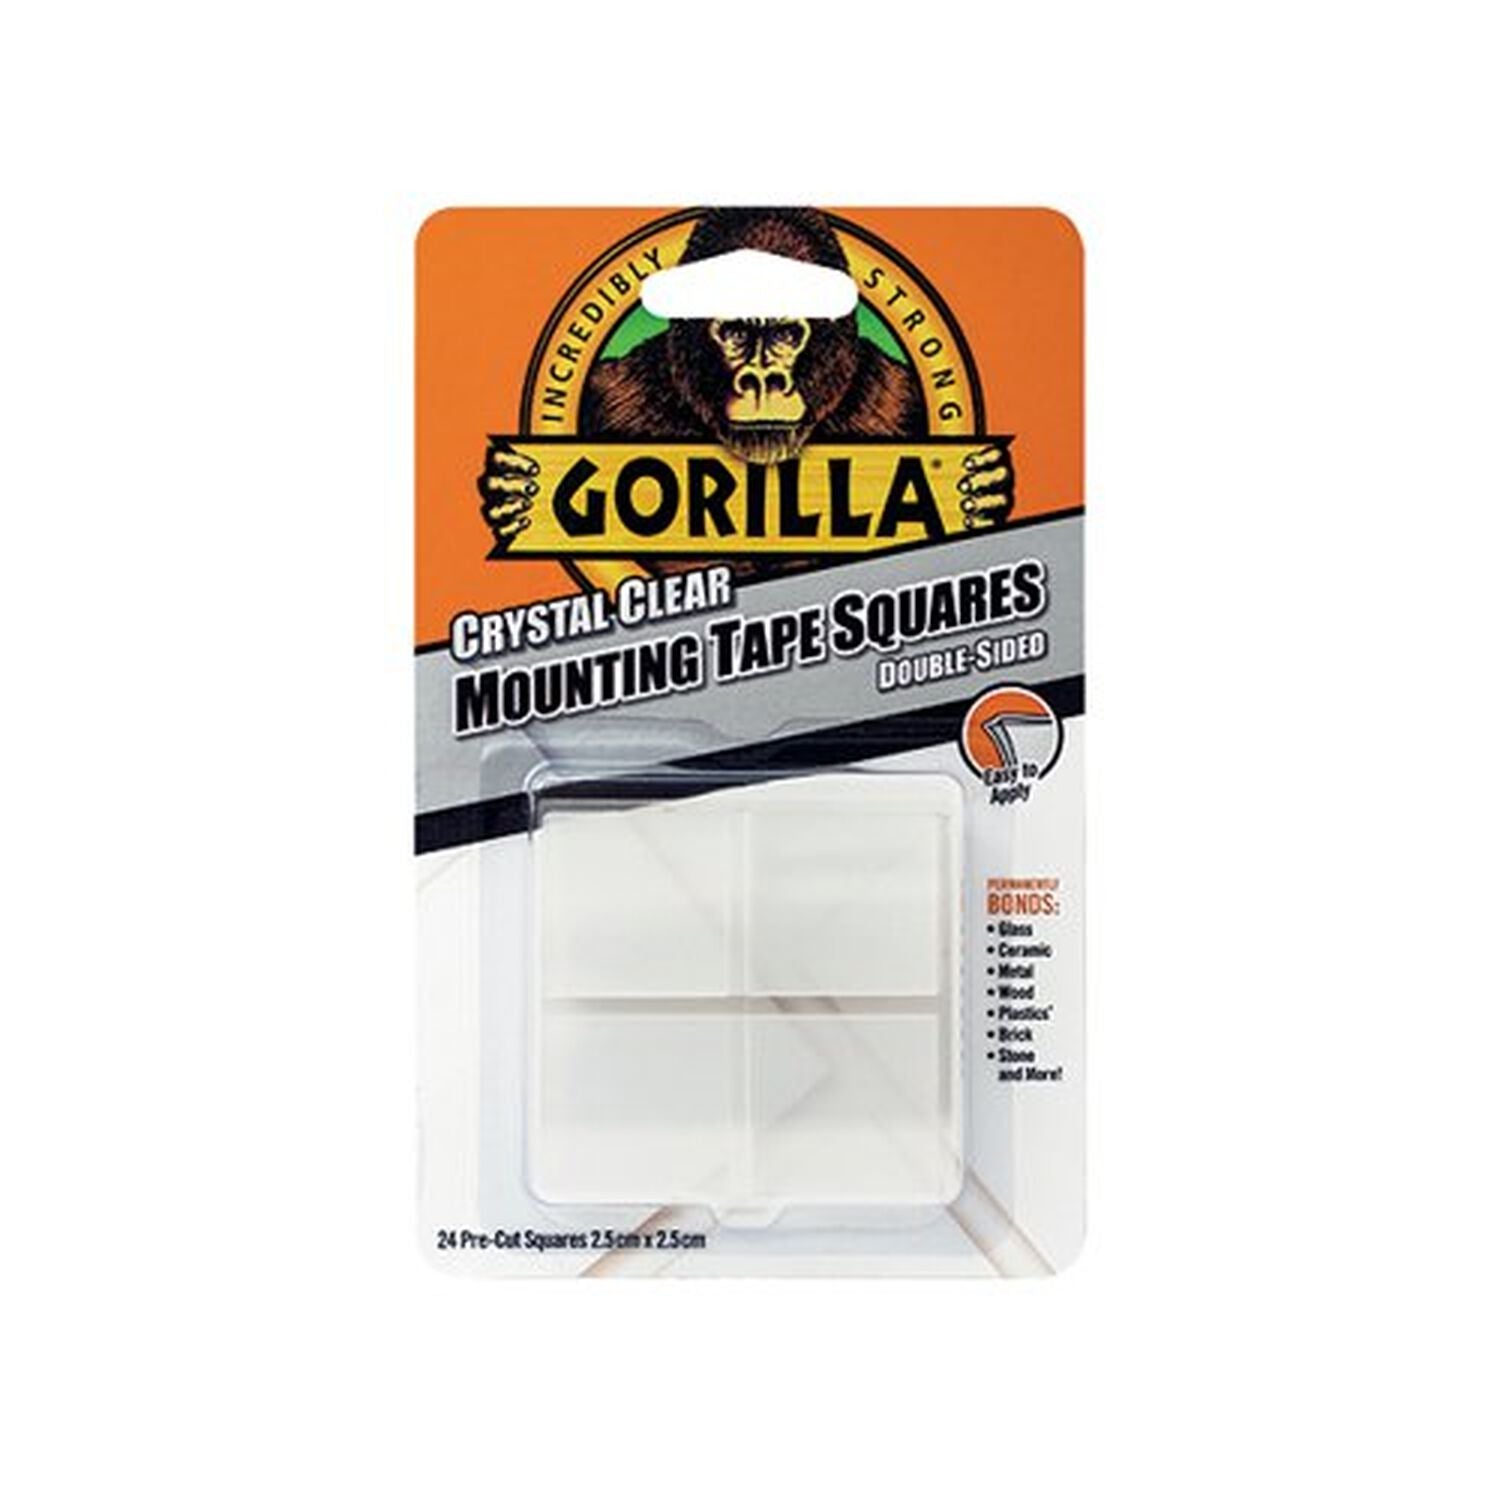 Gorilla Mounting Tape Squares Clear - 2.5cm